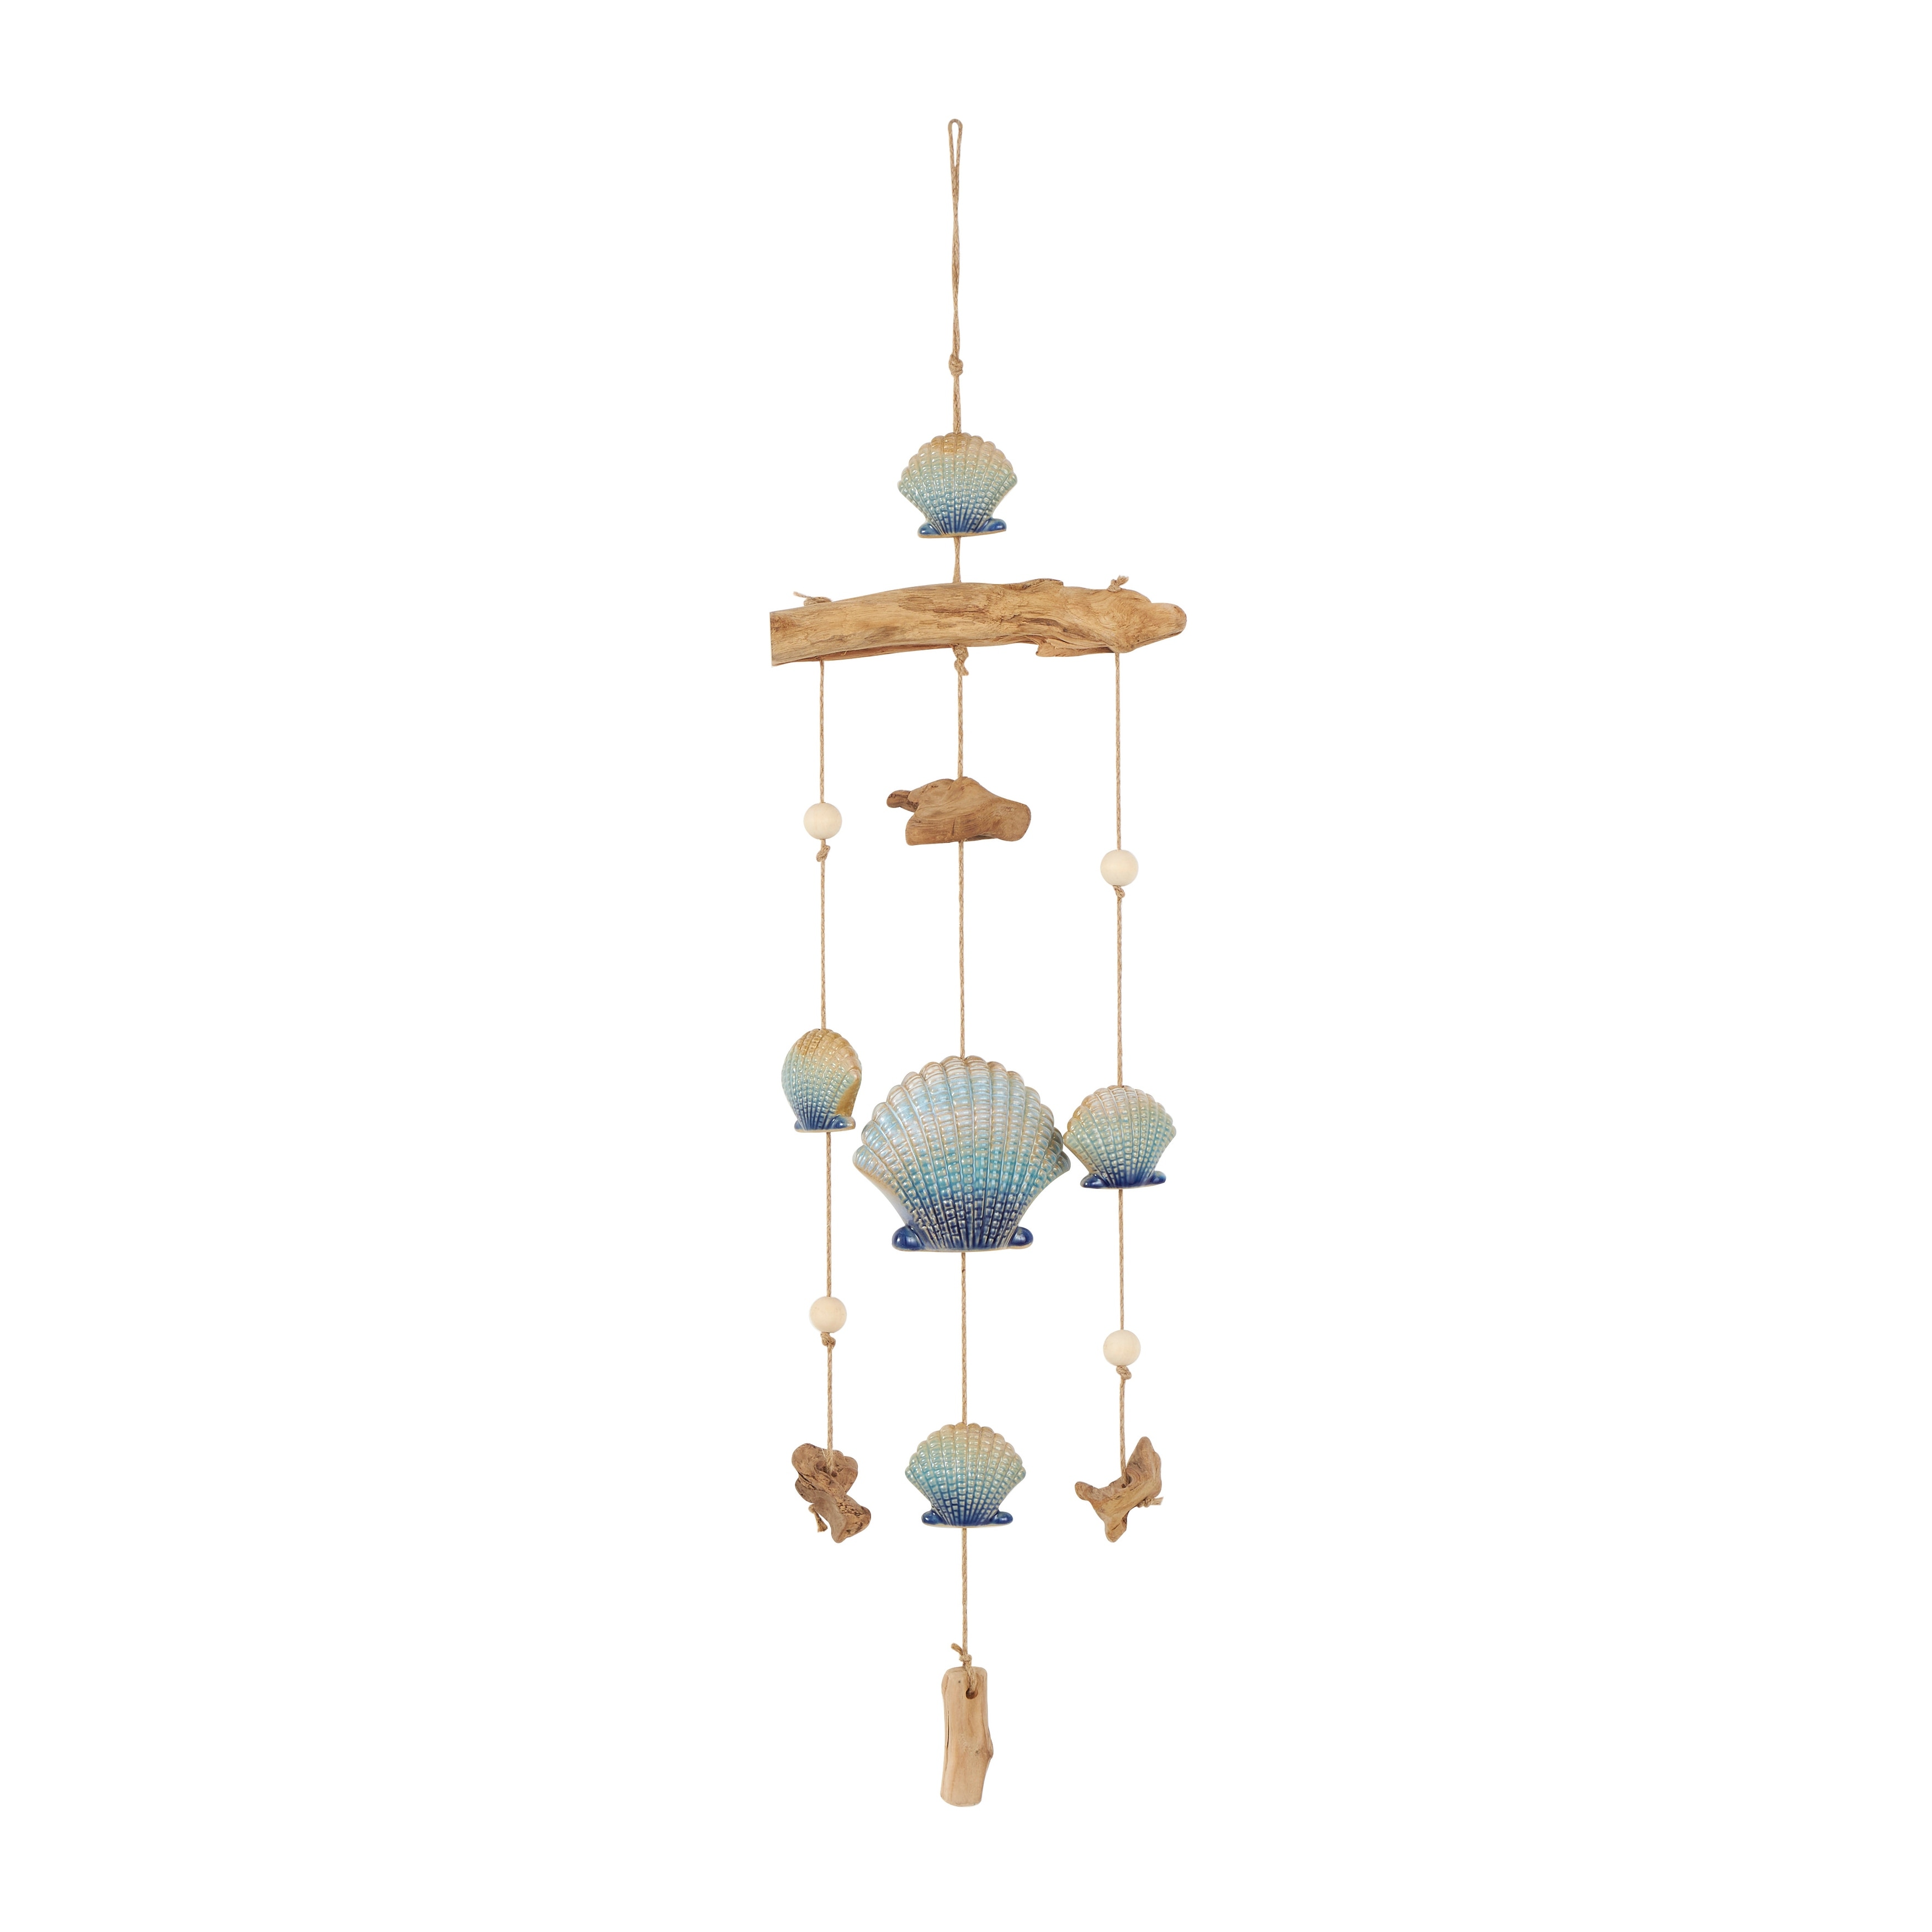 https://ak1.ostkcdn.com/images/products/is/images/direct/7ef67386870fbf7bf27d5a761fa5a1e2660d8529/Blue-Ceramic-Handmade-Ombre-Shell-Windchime-with-Driftwood-and-Bead-Accents.jpg